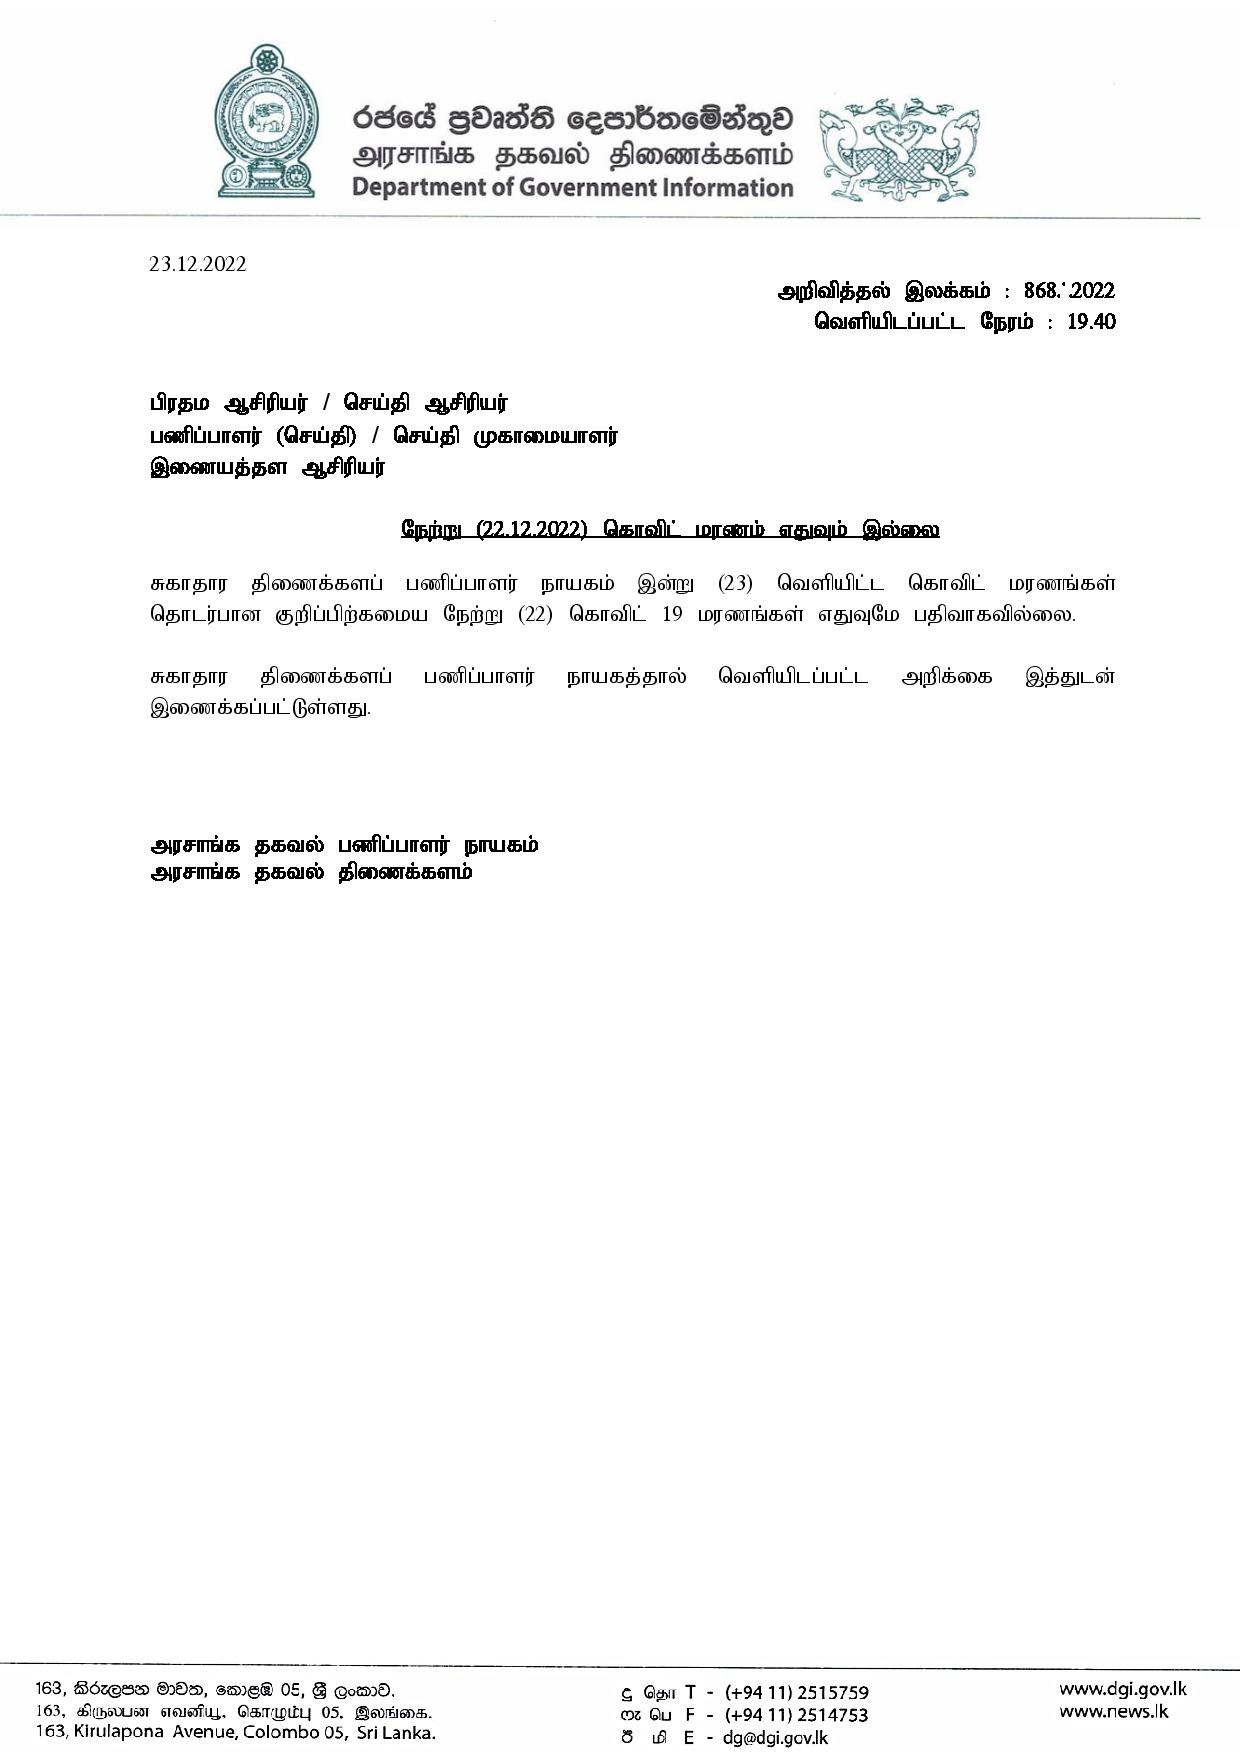 Release No 868 Tamil page 001